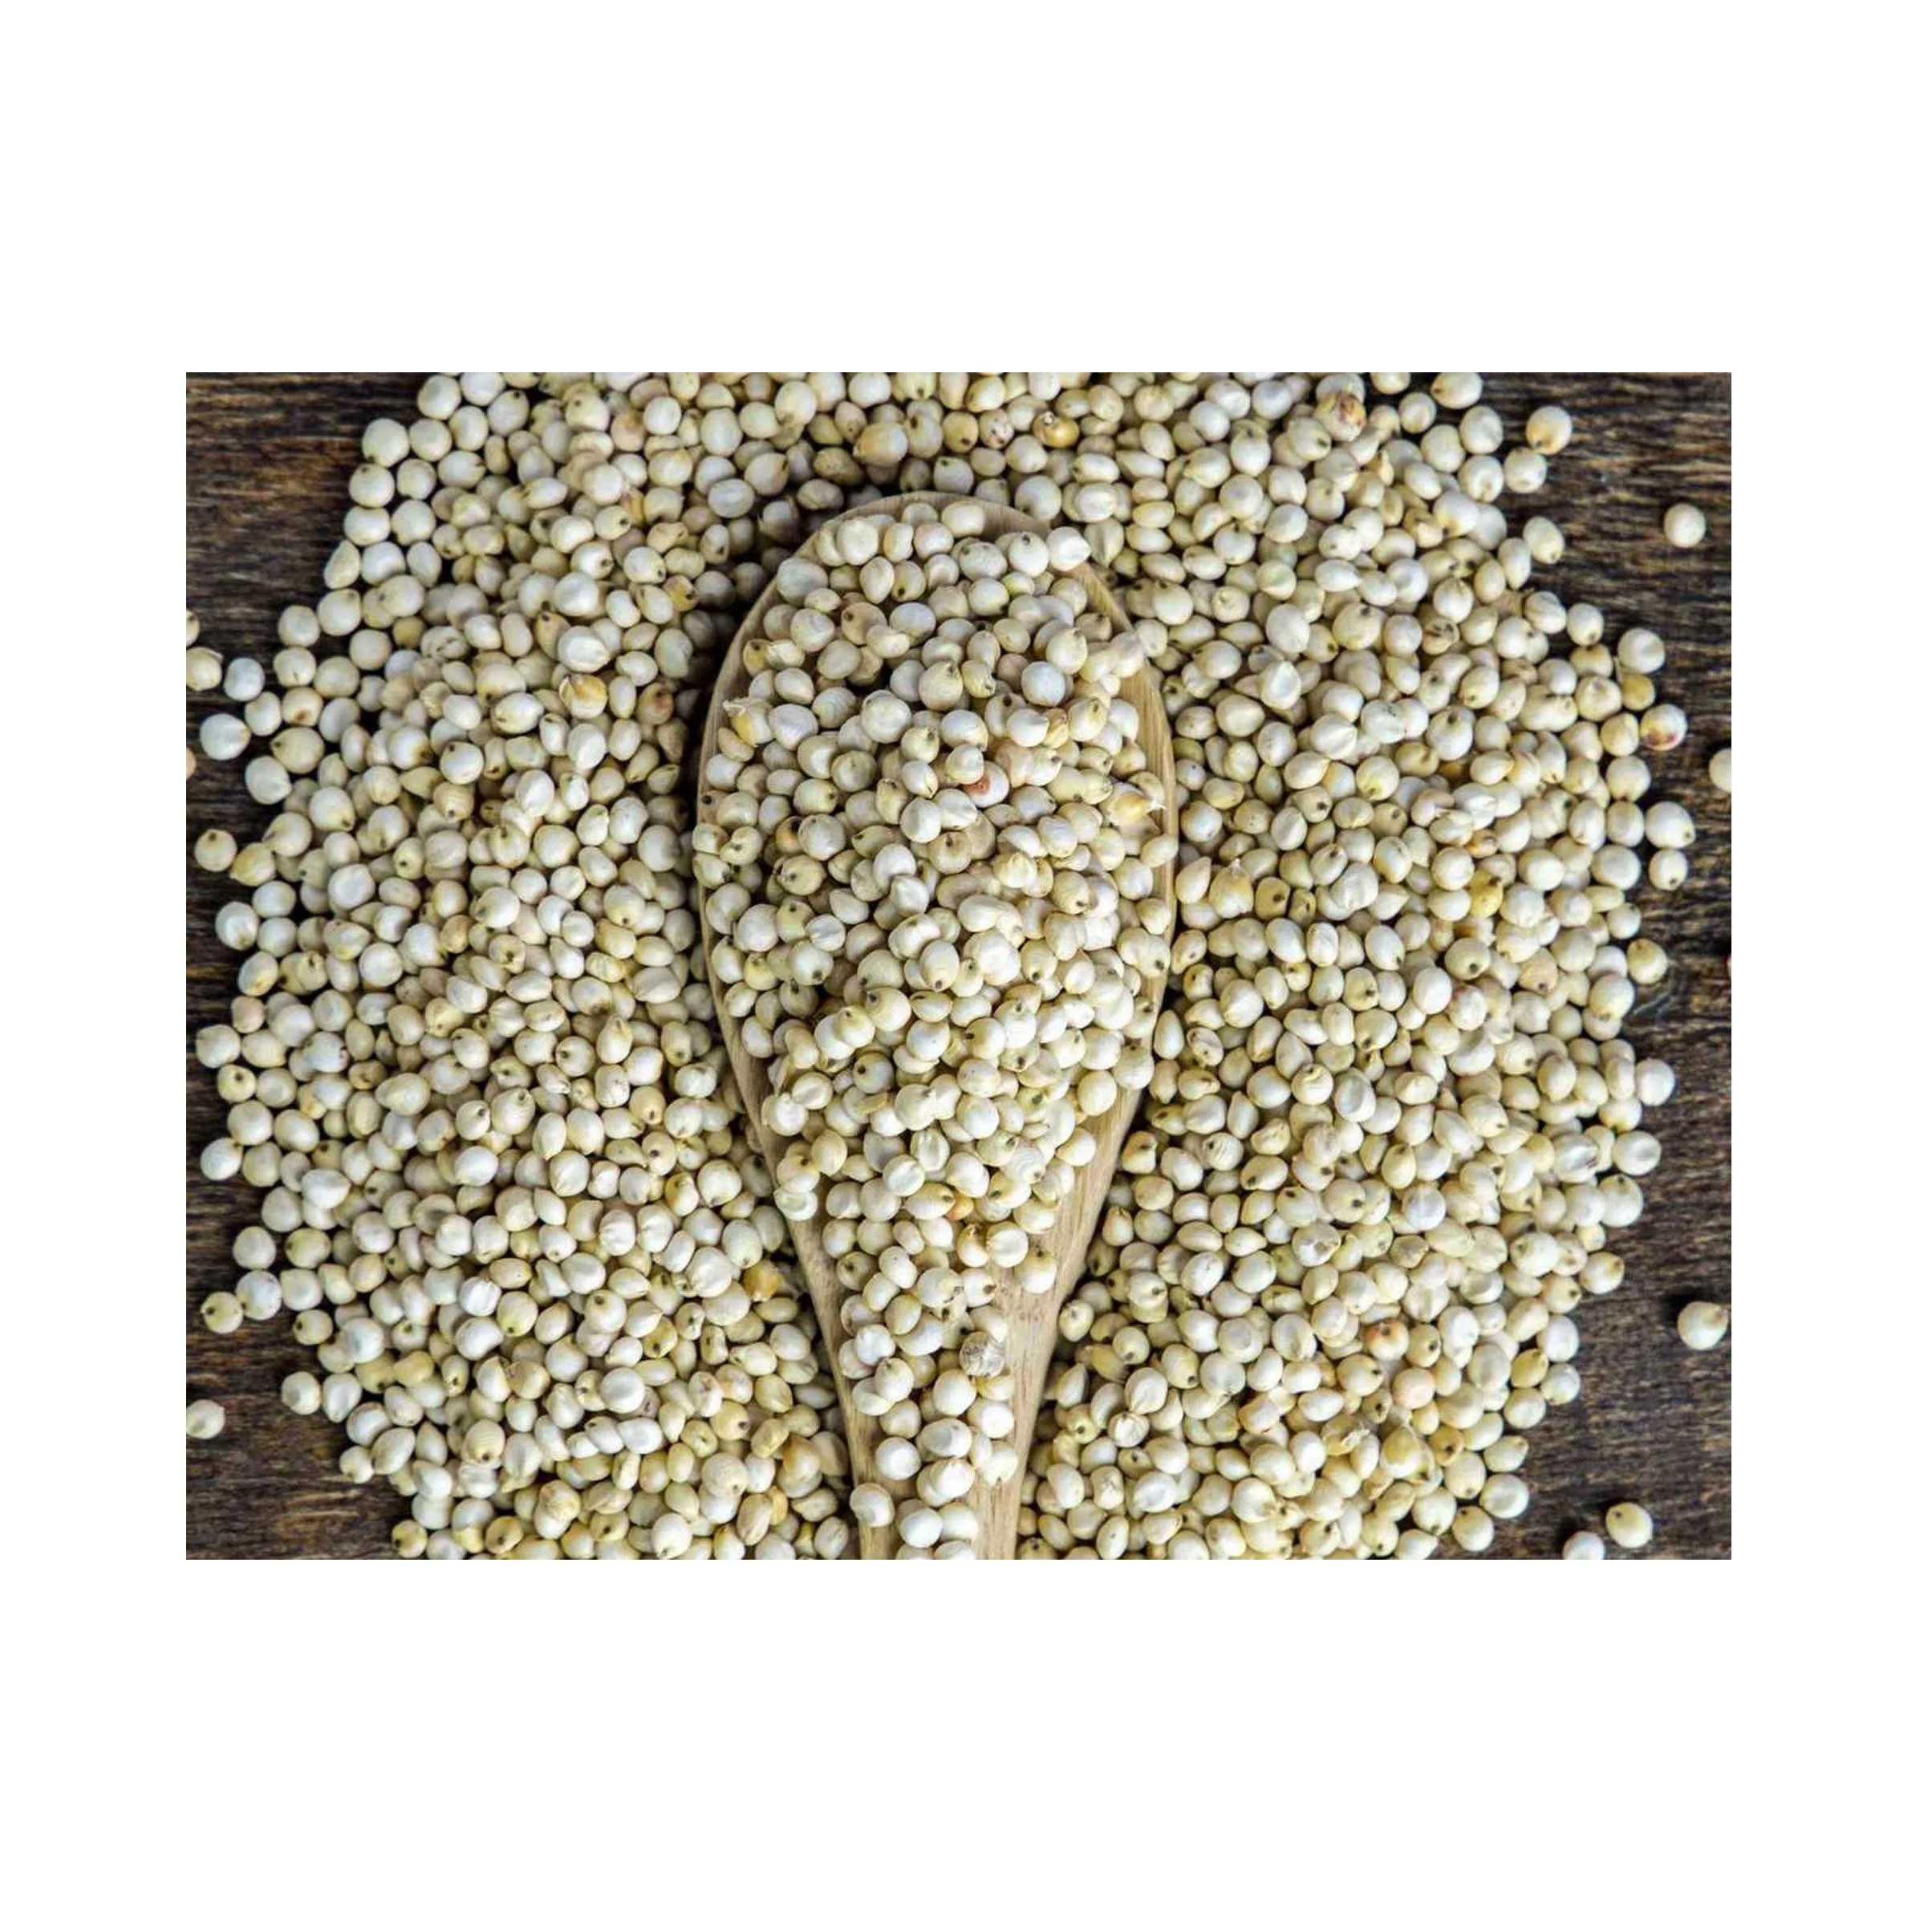 Red And White Sorghum For Sale / Sorghum Flour White / Sorghum Grains best prices